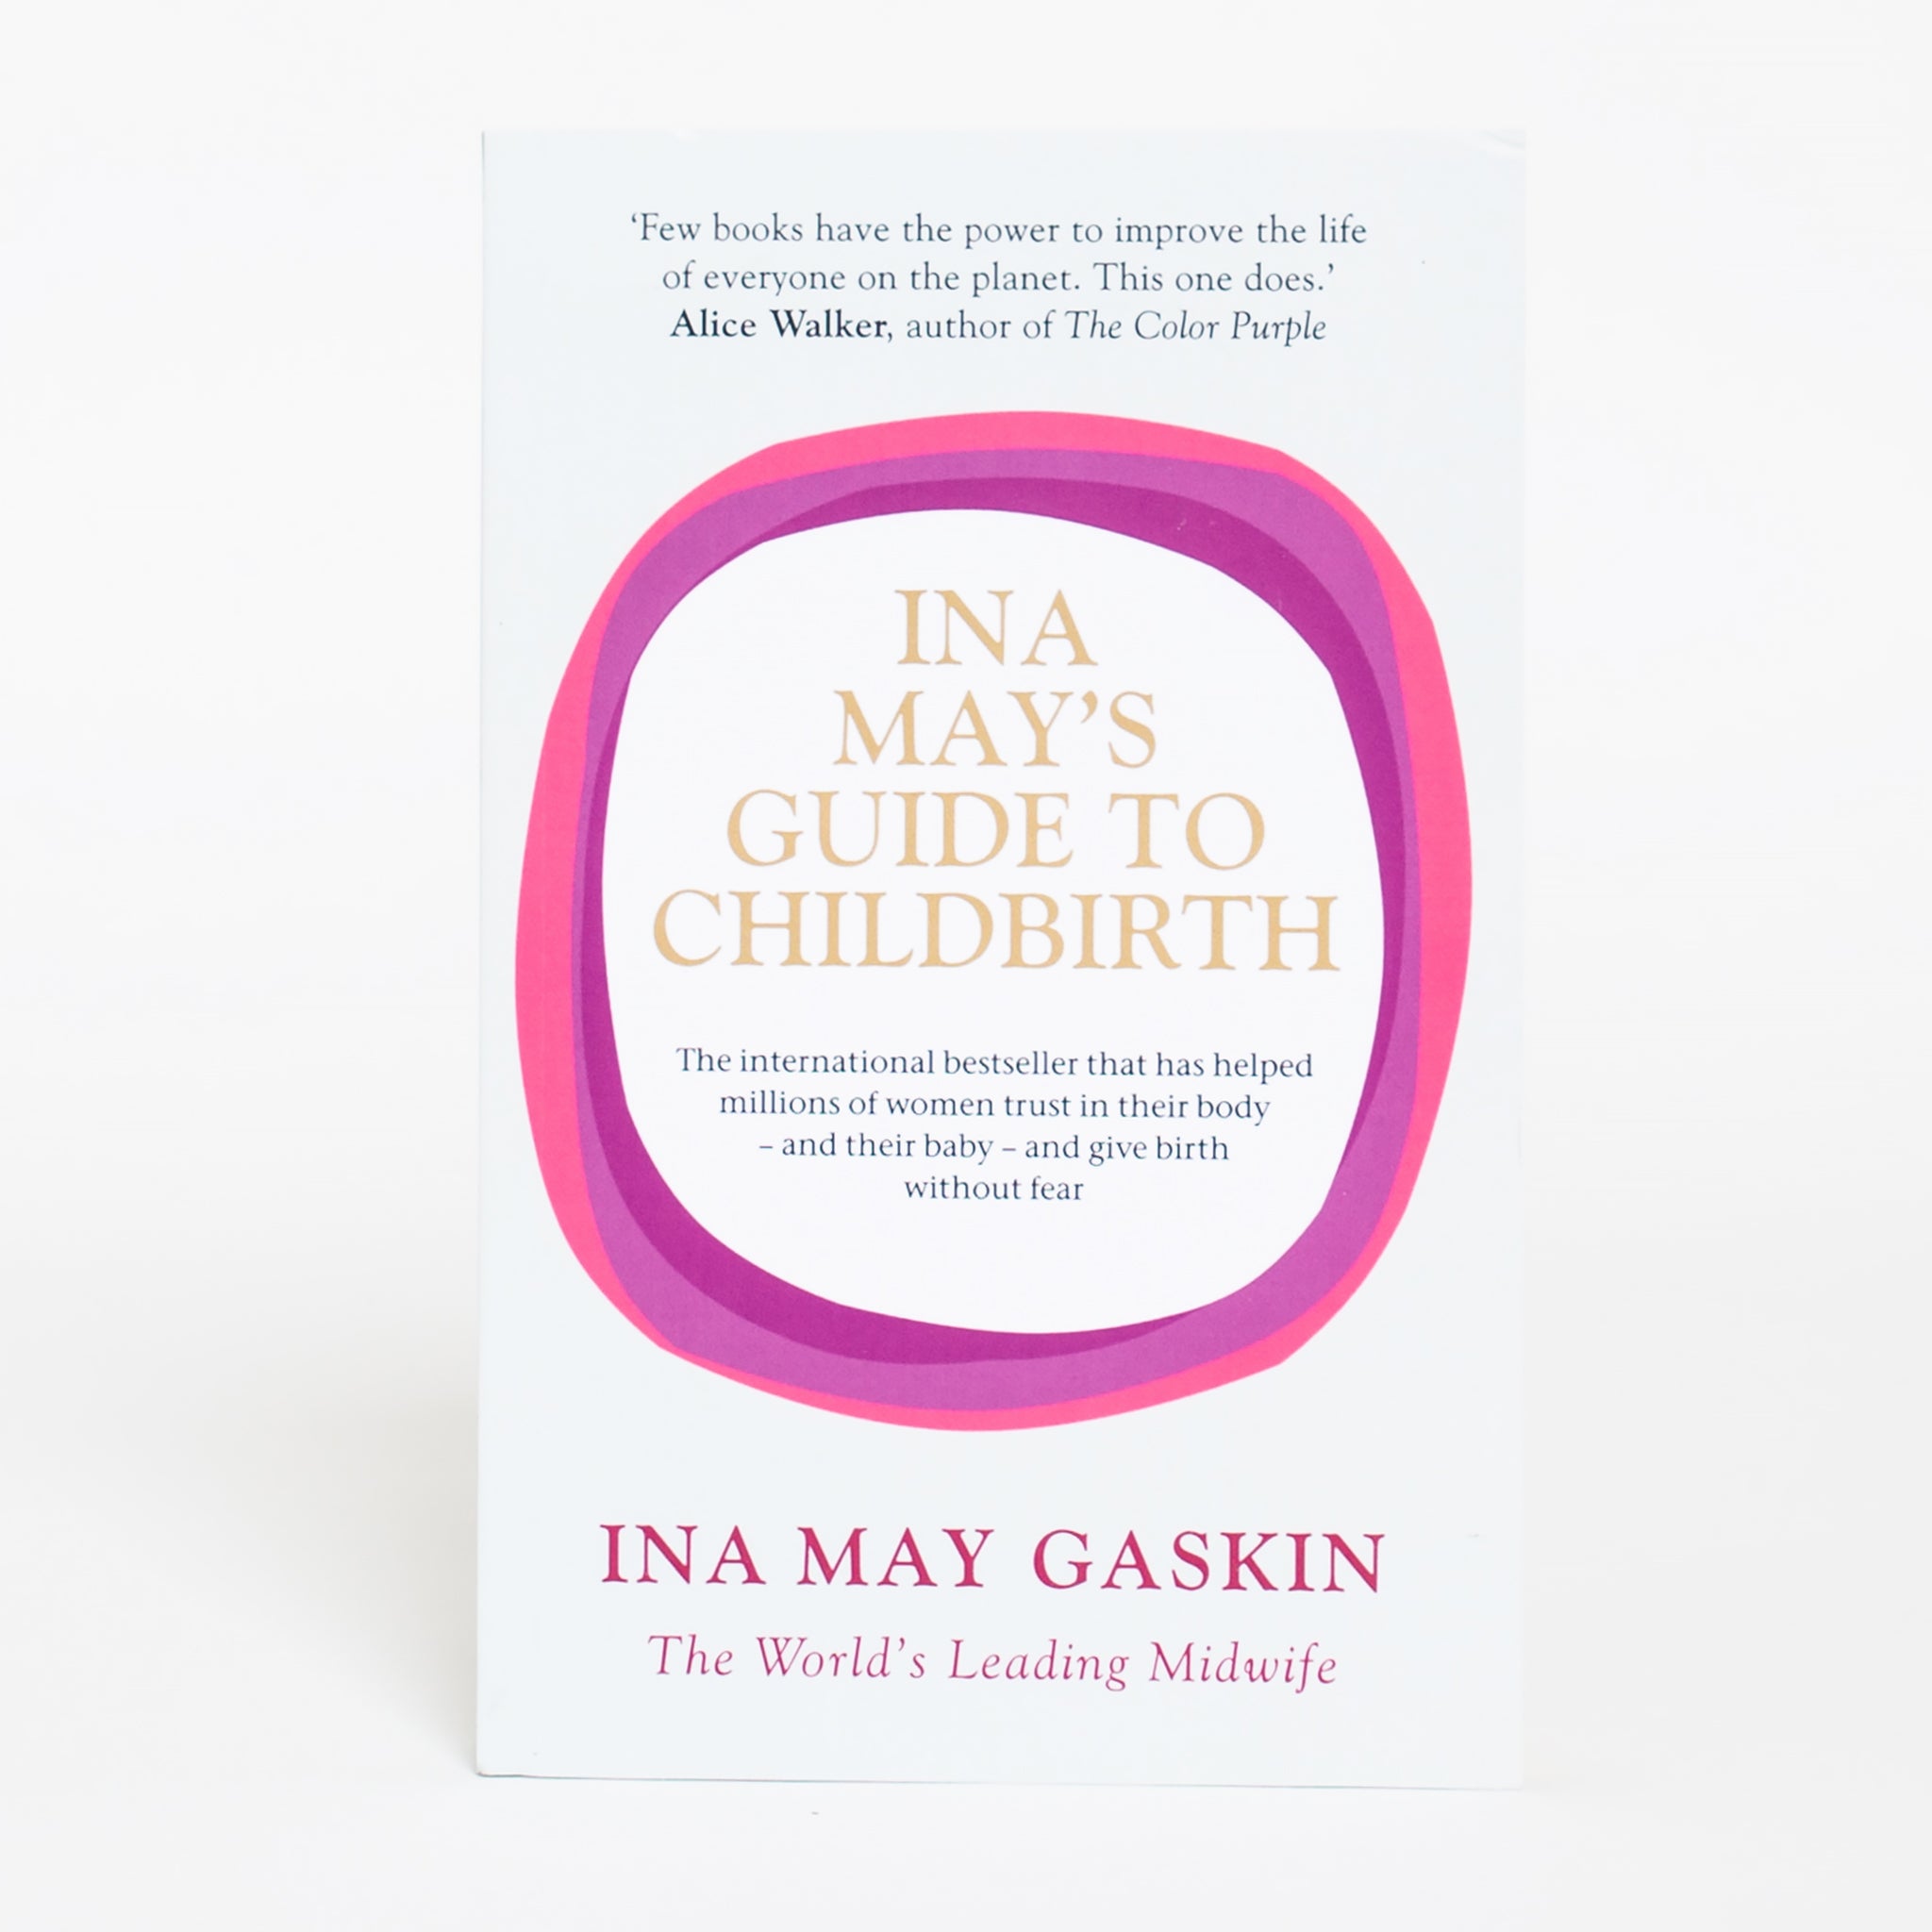 Ina May’s Guide to Childbirth